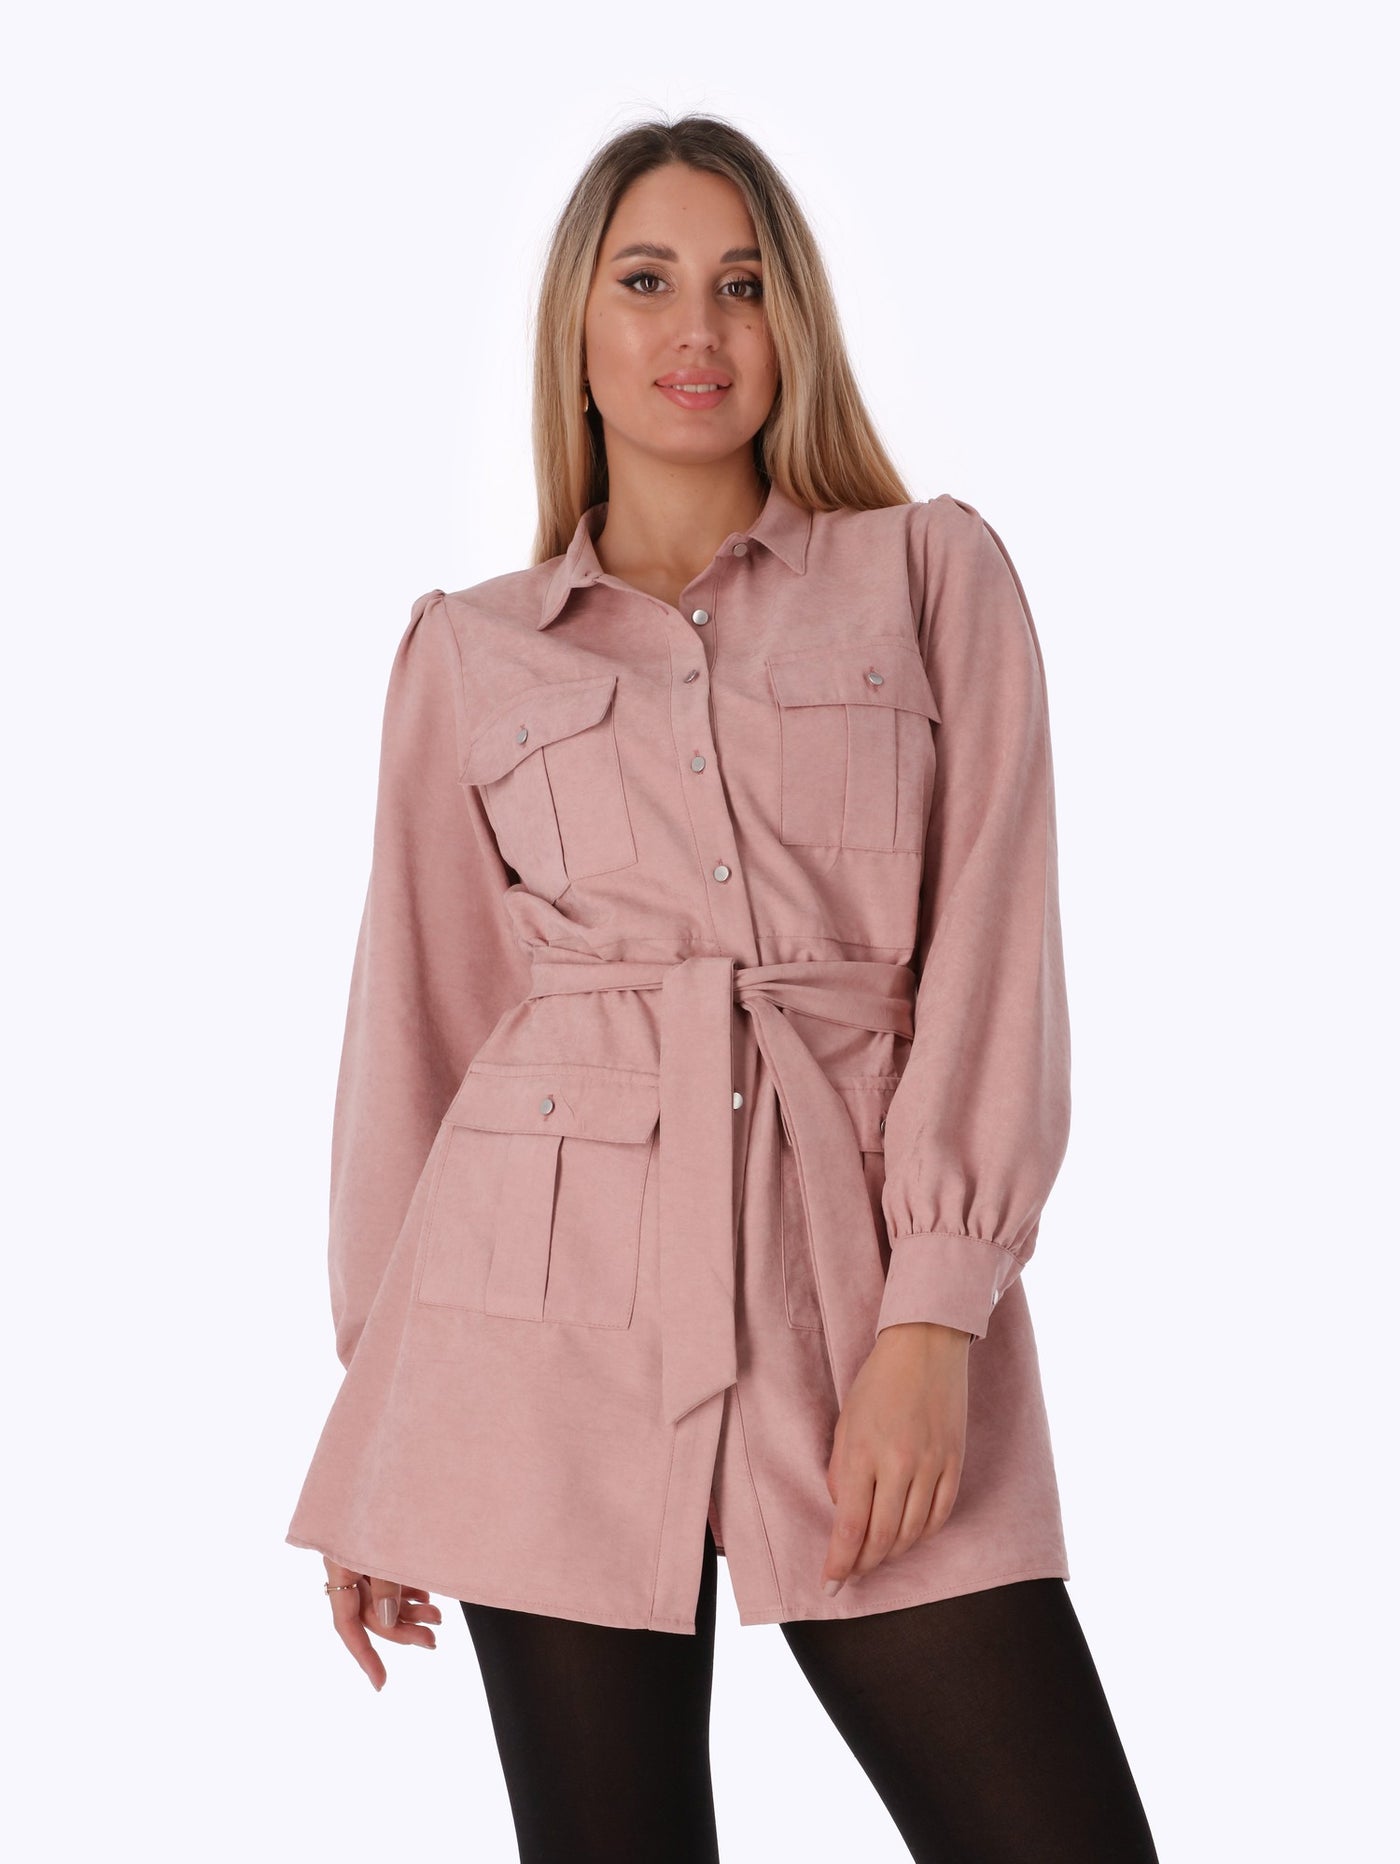 Blouse - Tie Waist - Pocketed